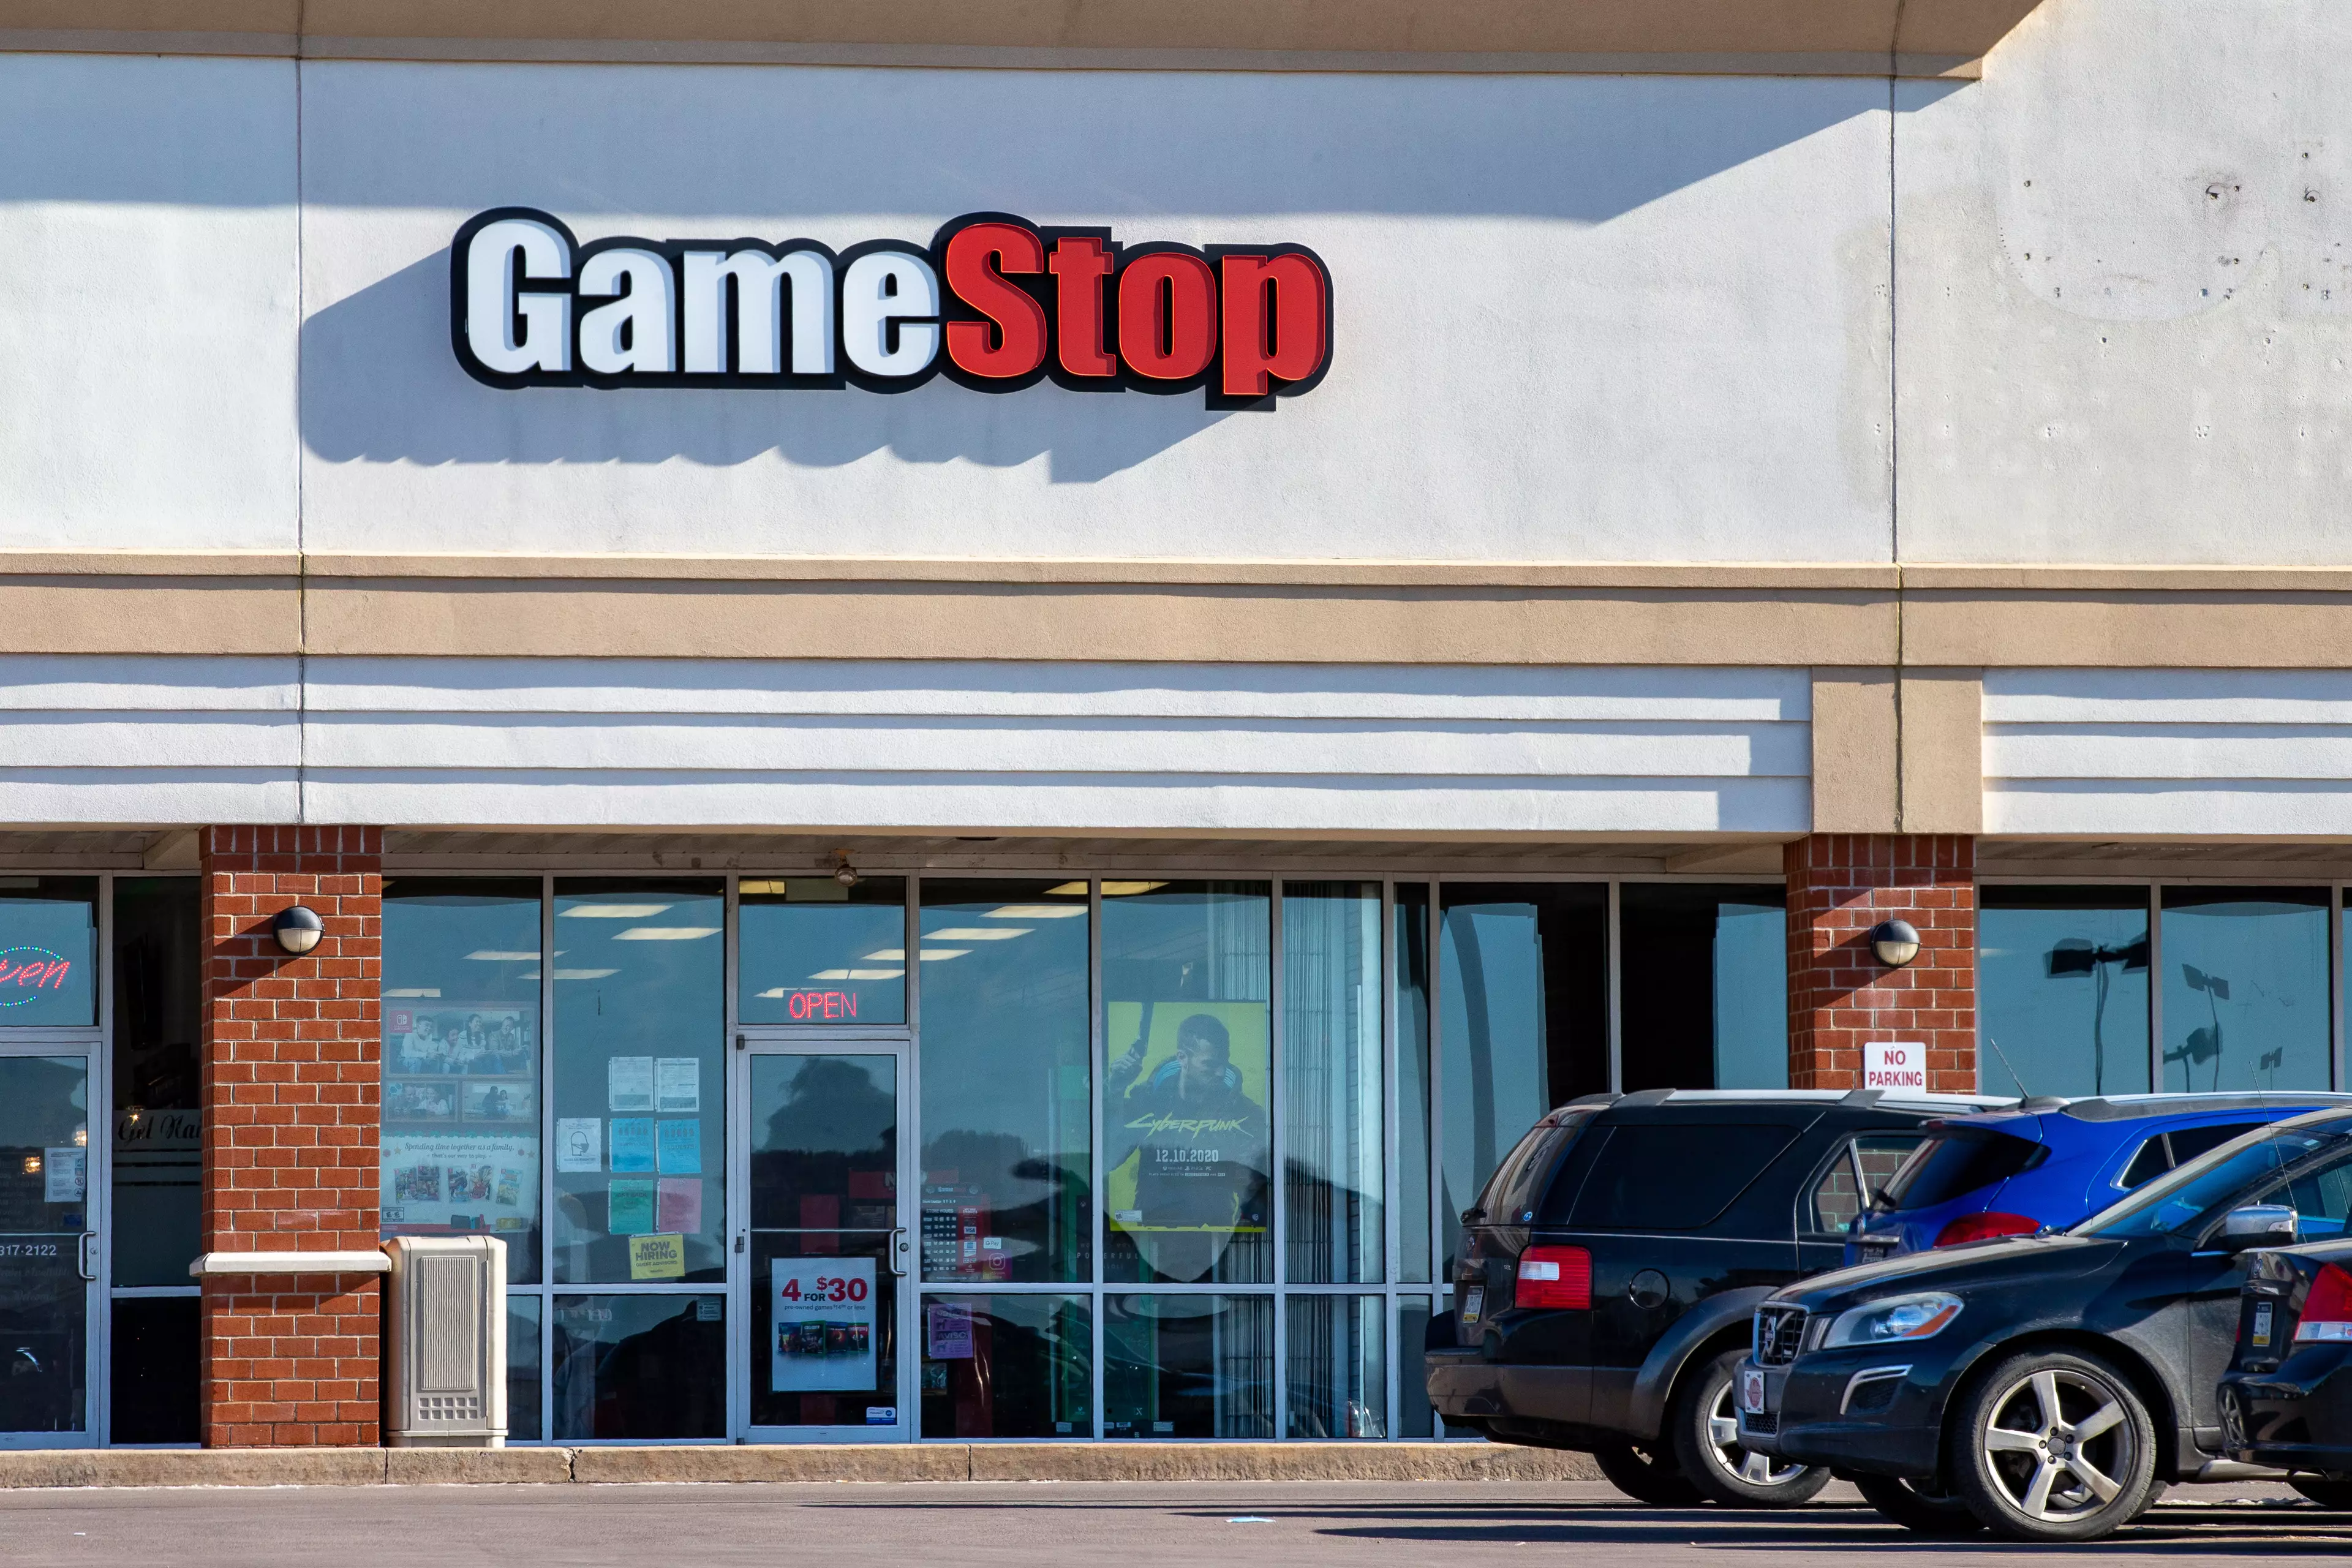 Reddit users have made millions from investing in GameStop.